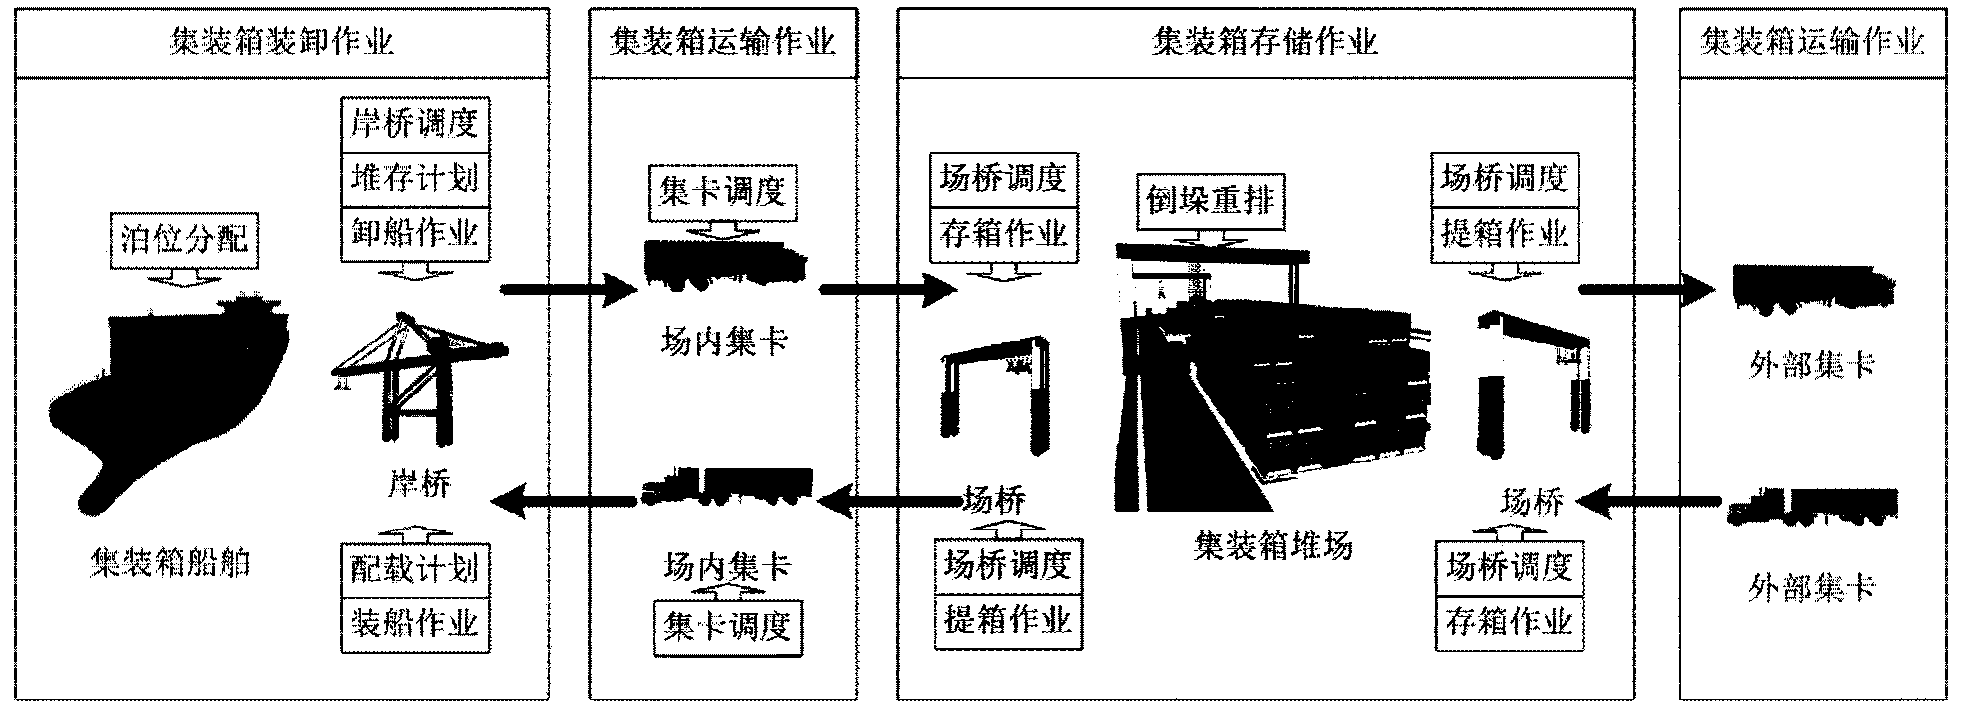 Cargo allocation method for improving quay crane operation efficiency and vessel stability of containers